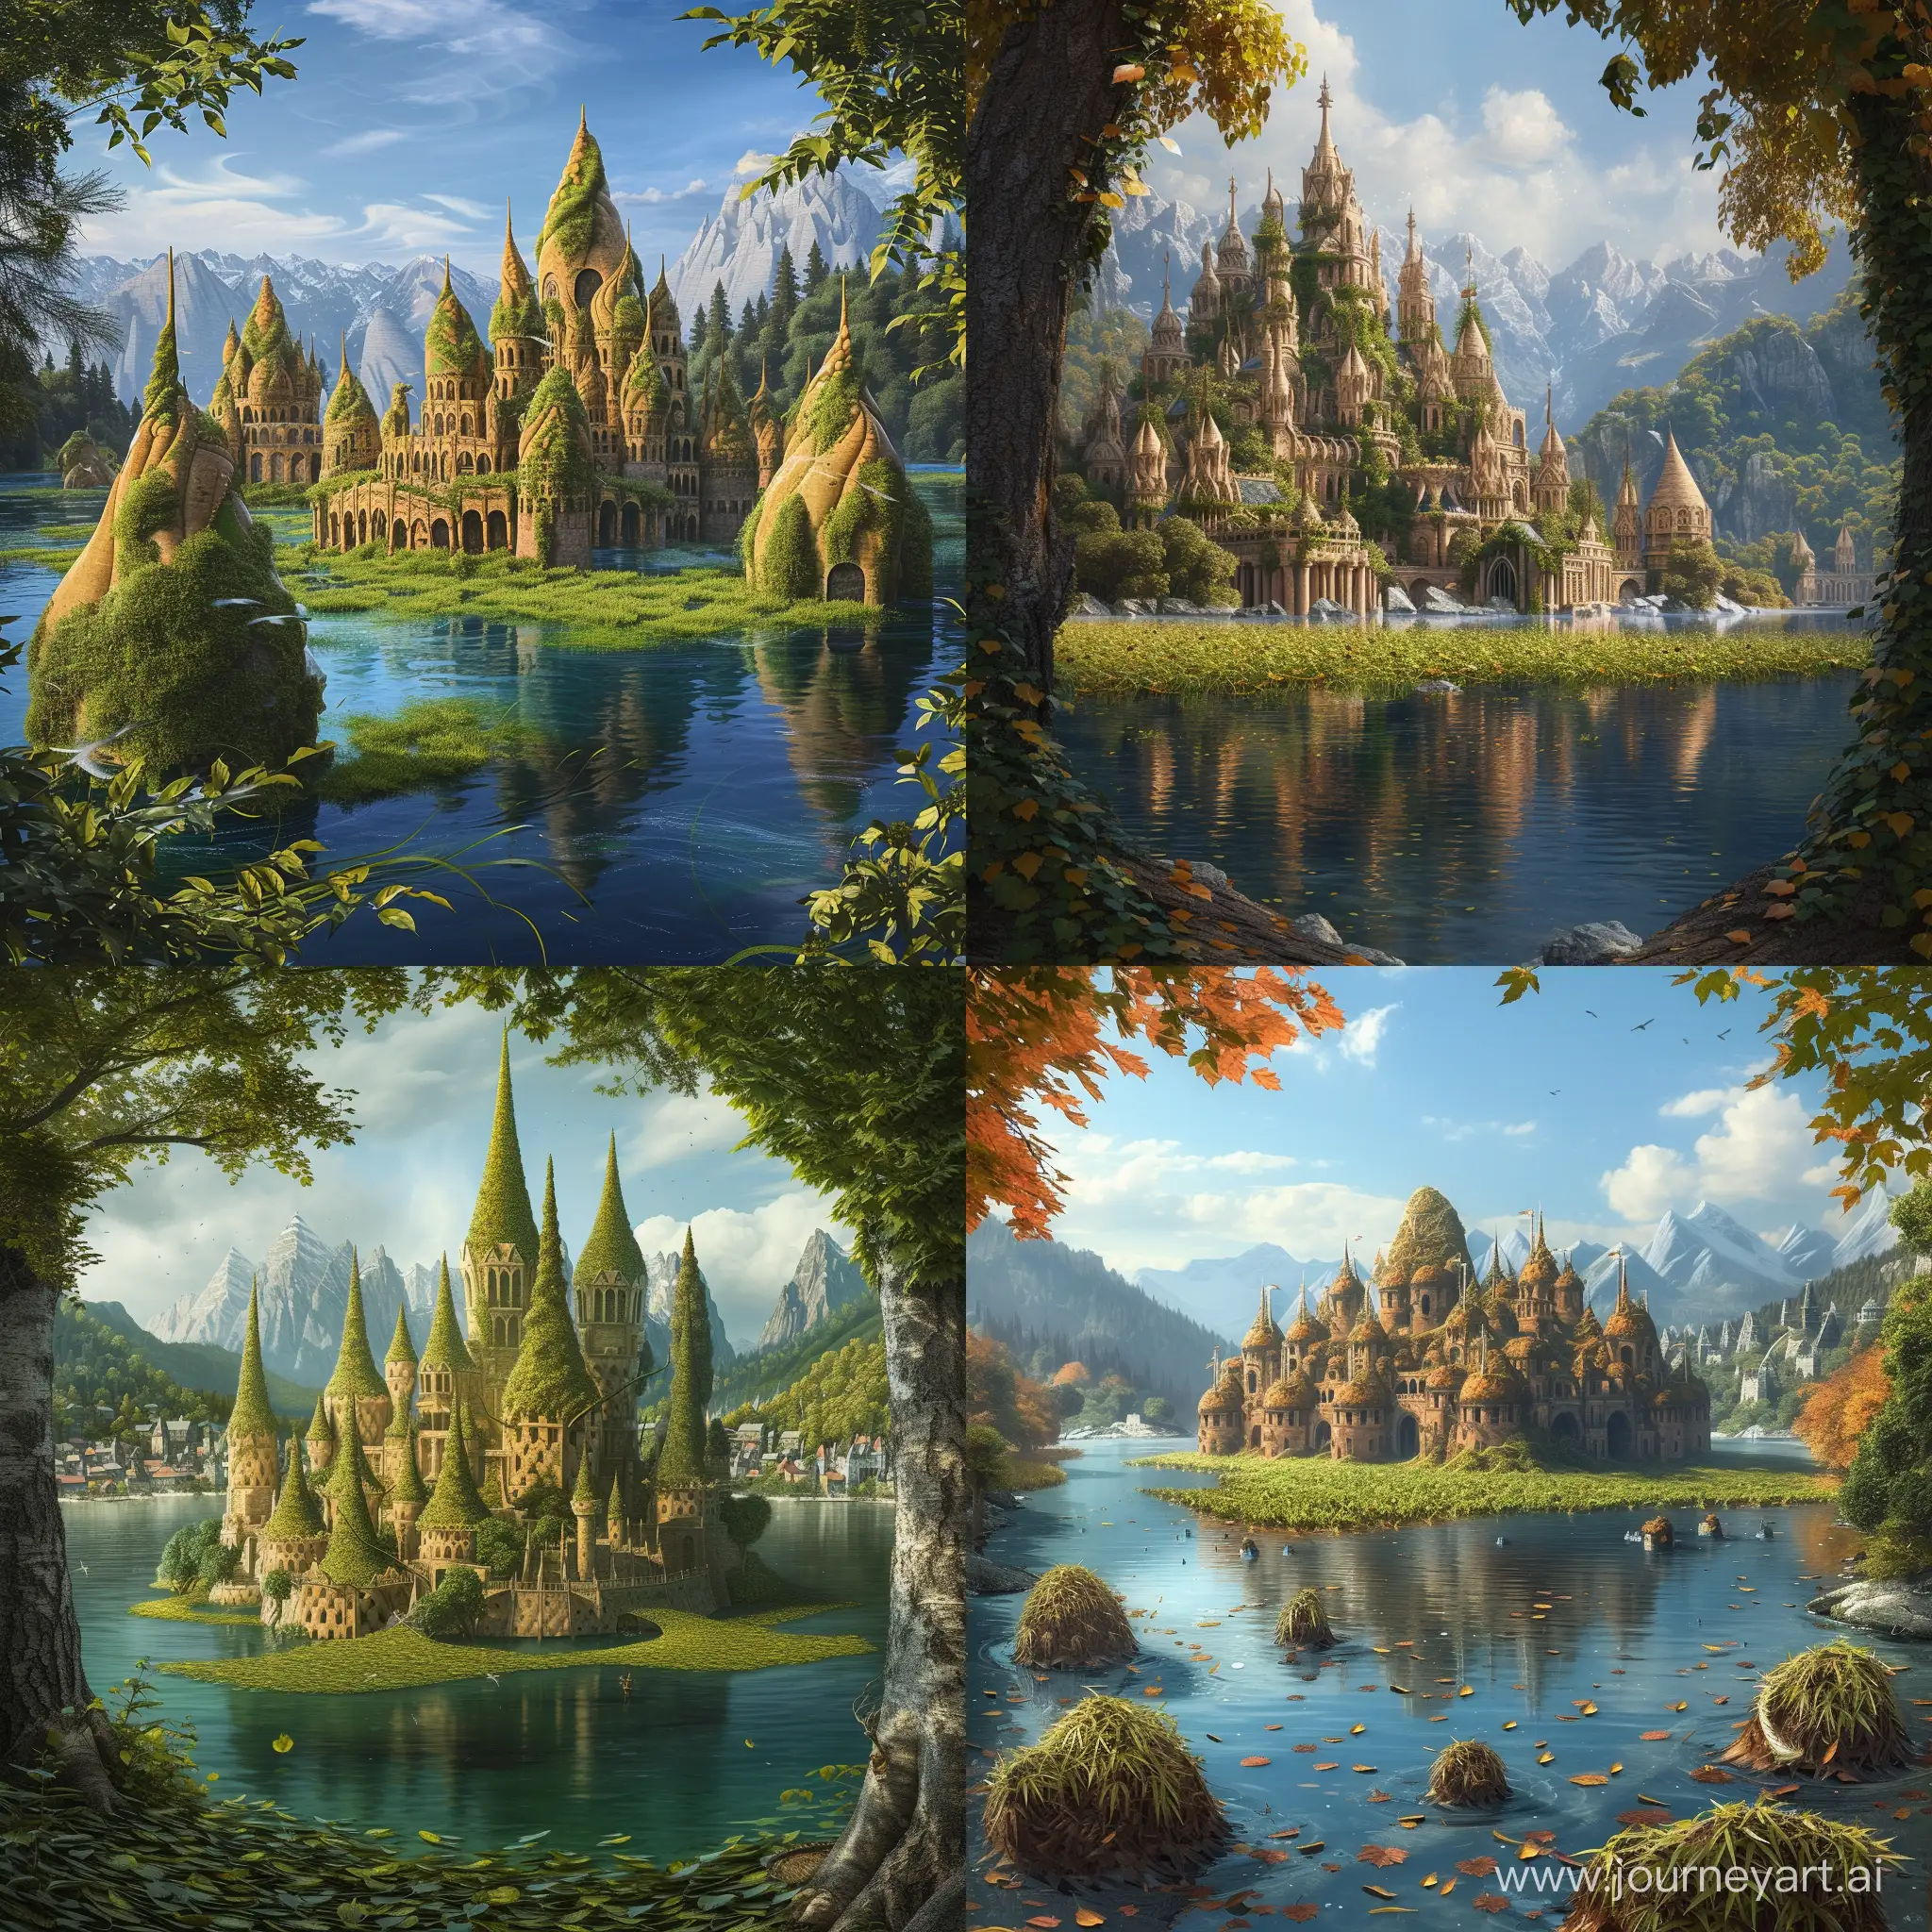 A painting depicting a surreal city surrounded by a summer forest and mountains!!!!! Palaces built of grass and leaves are visible!!!!!!!! highly detailed fantasy art, beautiful detailed fantasy, highly detailed surreal art, highly detailed fantasy digital art, fantasy city setting, impressive fantasy landscape, detailed fantasy art, detailed fantasy illustration, fantasy matte painting, cute, noisy magical city, realistic fantasy decoration, magnificent digital art with details inspired by Cyril Rolando, Anatoly Leushin, By Alex Fishgate, An amazing landscape painting, , Wide-angle fantasy art, , bright colors, modern oil painting, high quality, high detail, masterpiece, front light, cinematography Painting depicting a surreal city surrounded by water!!!!! Palaces built of lynx tails and scales are visible!!!!!!!! highly detailed fantasy art, beautiful detailed fantasy, highly detailed surreal art, highly detailed fantasy digital art, fantasy city setting, impressive fantasy landscape, detailed fantasy art, detailed fantasy illustration, fantasy matte painting, cute, noisy magical city, fantasy D&D scenery, realistic fantasy decoration, magnificent digital art with details inspired by Cyril Rolando, Anatoly Leushin, Alex Fishgate, Stunning landscape painting, , Wide-angle fantasy art, , bright colors, modern oil painting, high quality, high detail, masterpiece, front light, cinematography --v 6 --ar 1:1 --no 32647